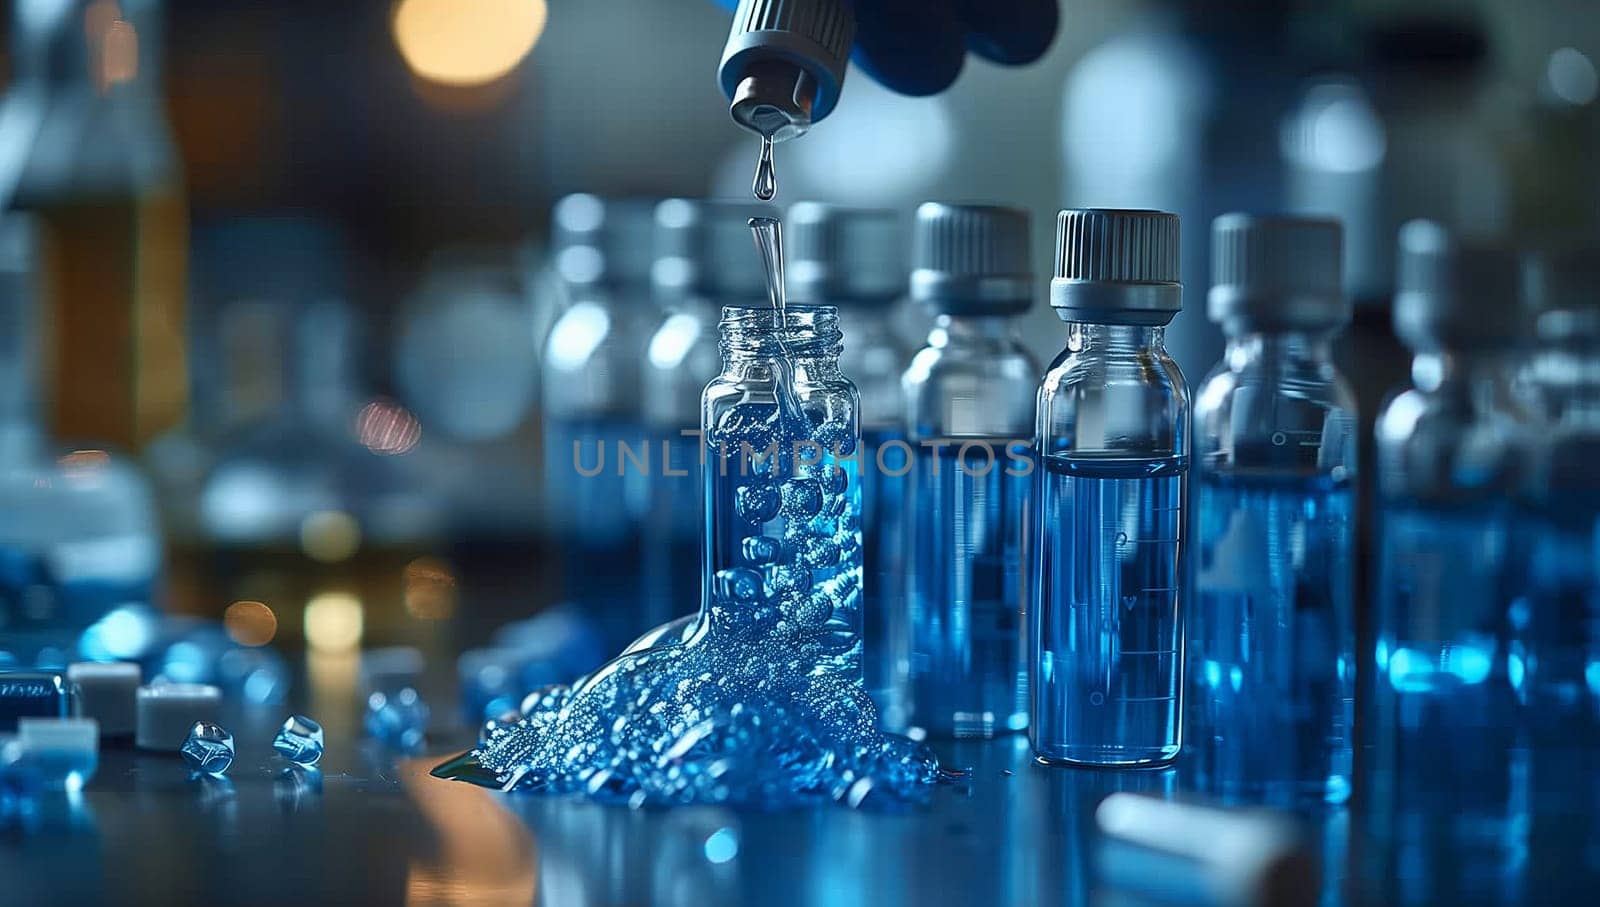 A person is pouring liquid from a plastic bottle into a test tube in a laboratory